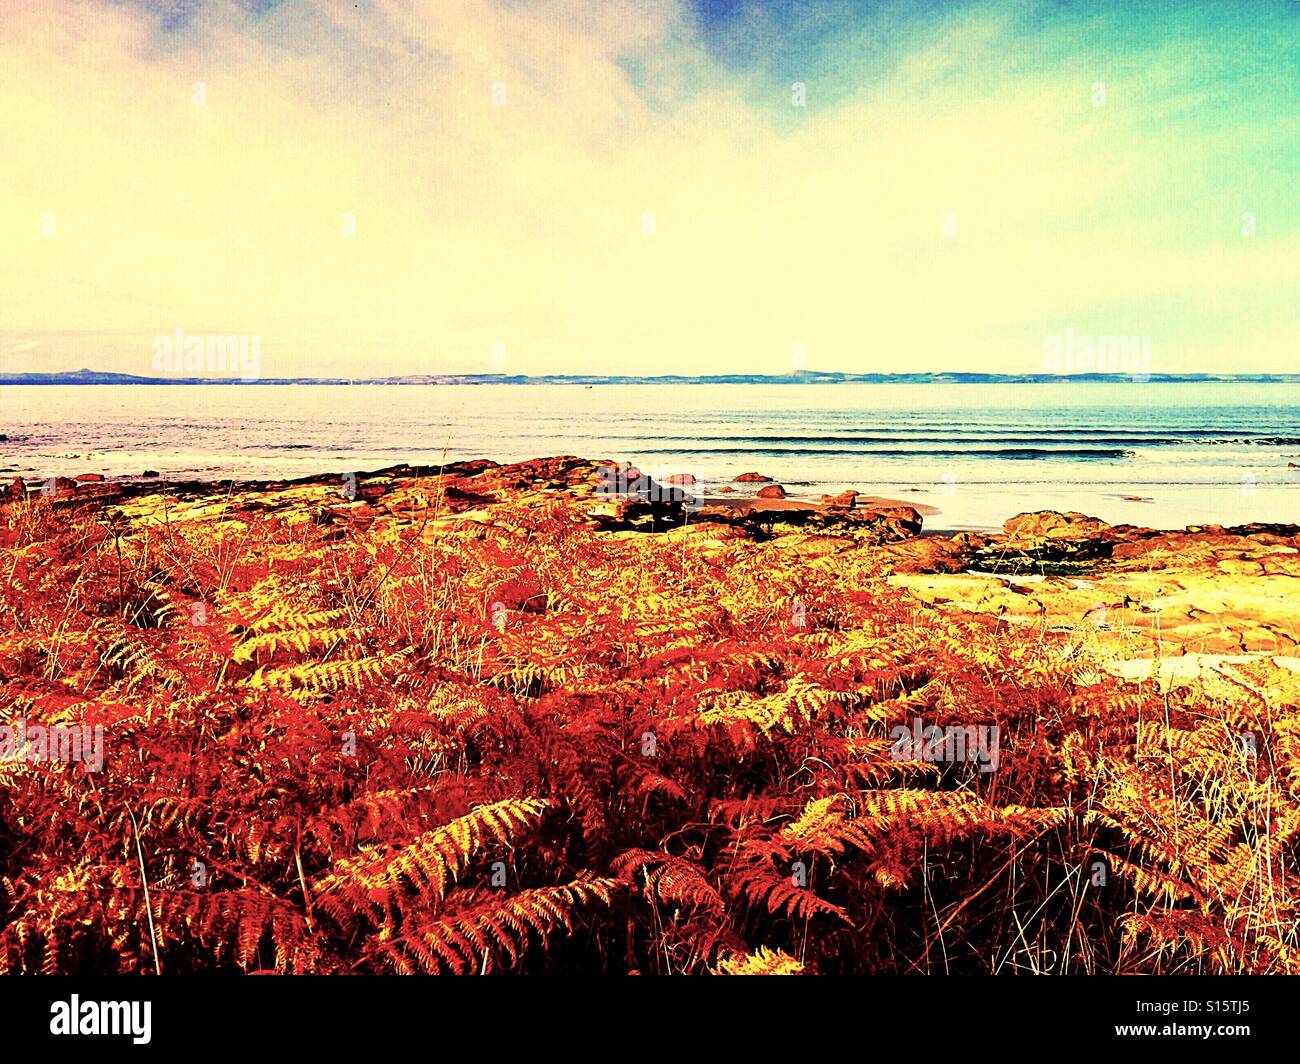 Even autumn comes to the beach.....  this bracken is turning many shades of autumn gold as it dies back. Stock Photo